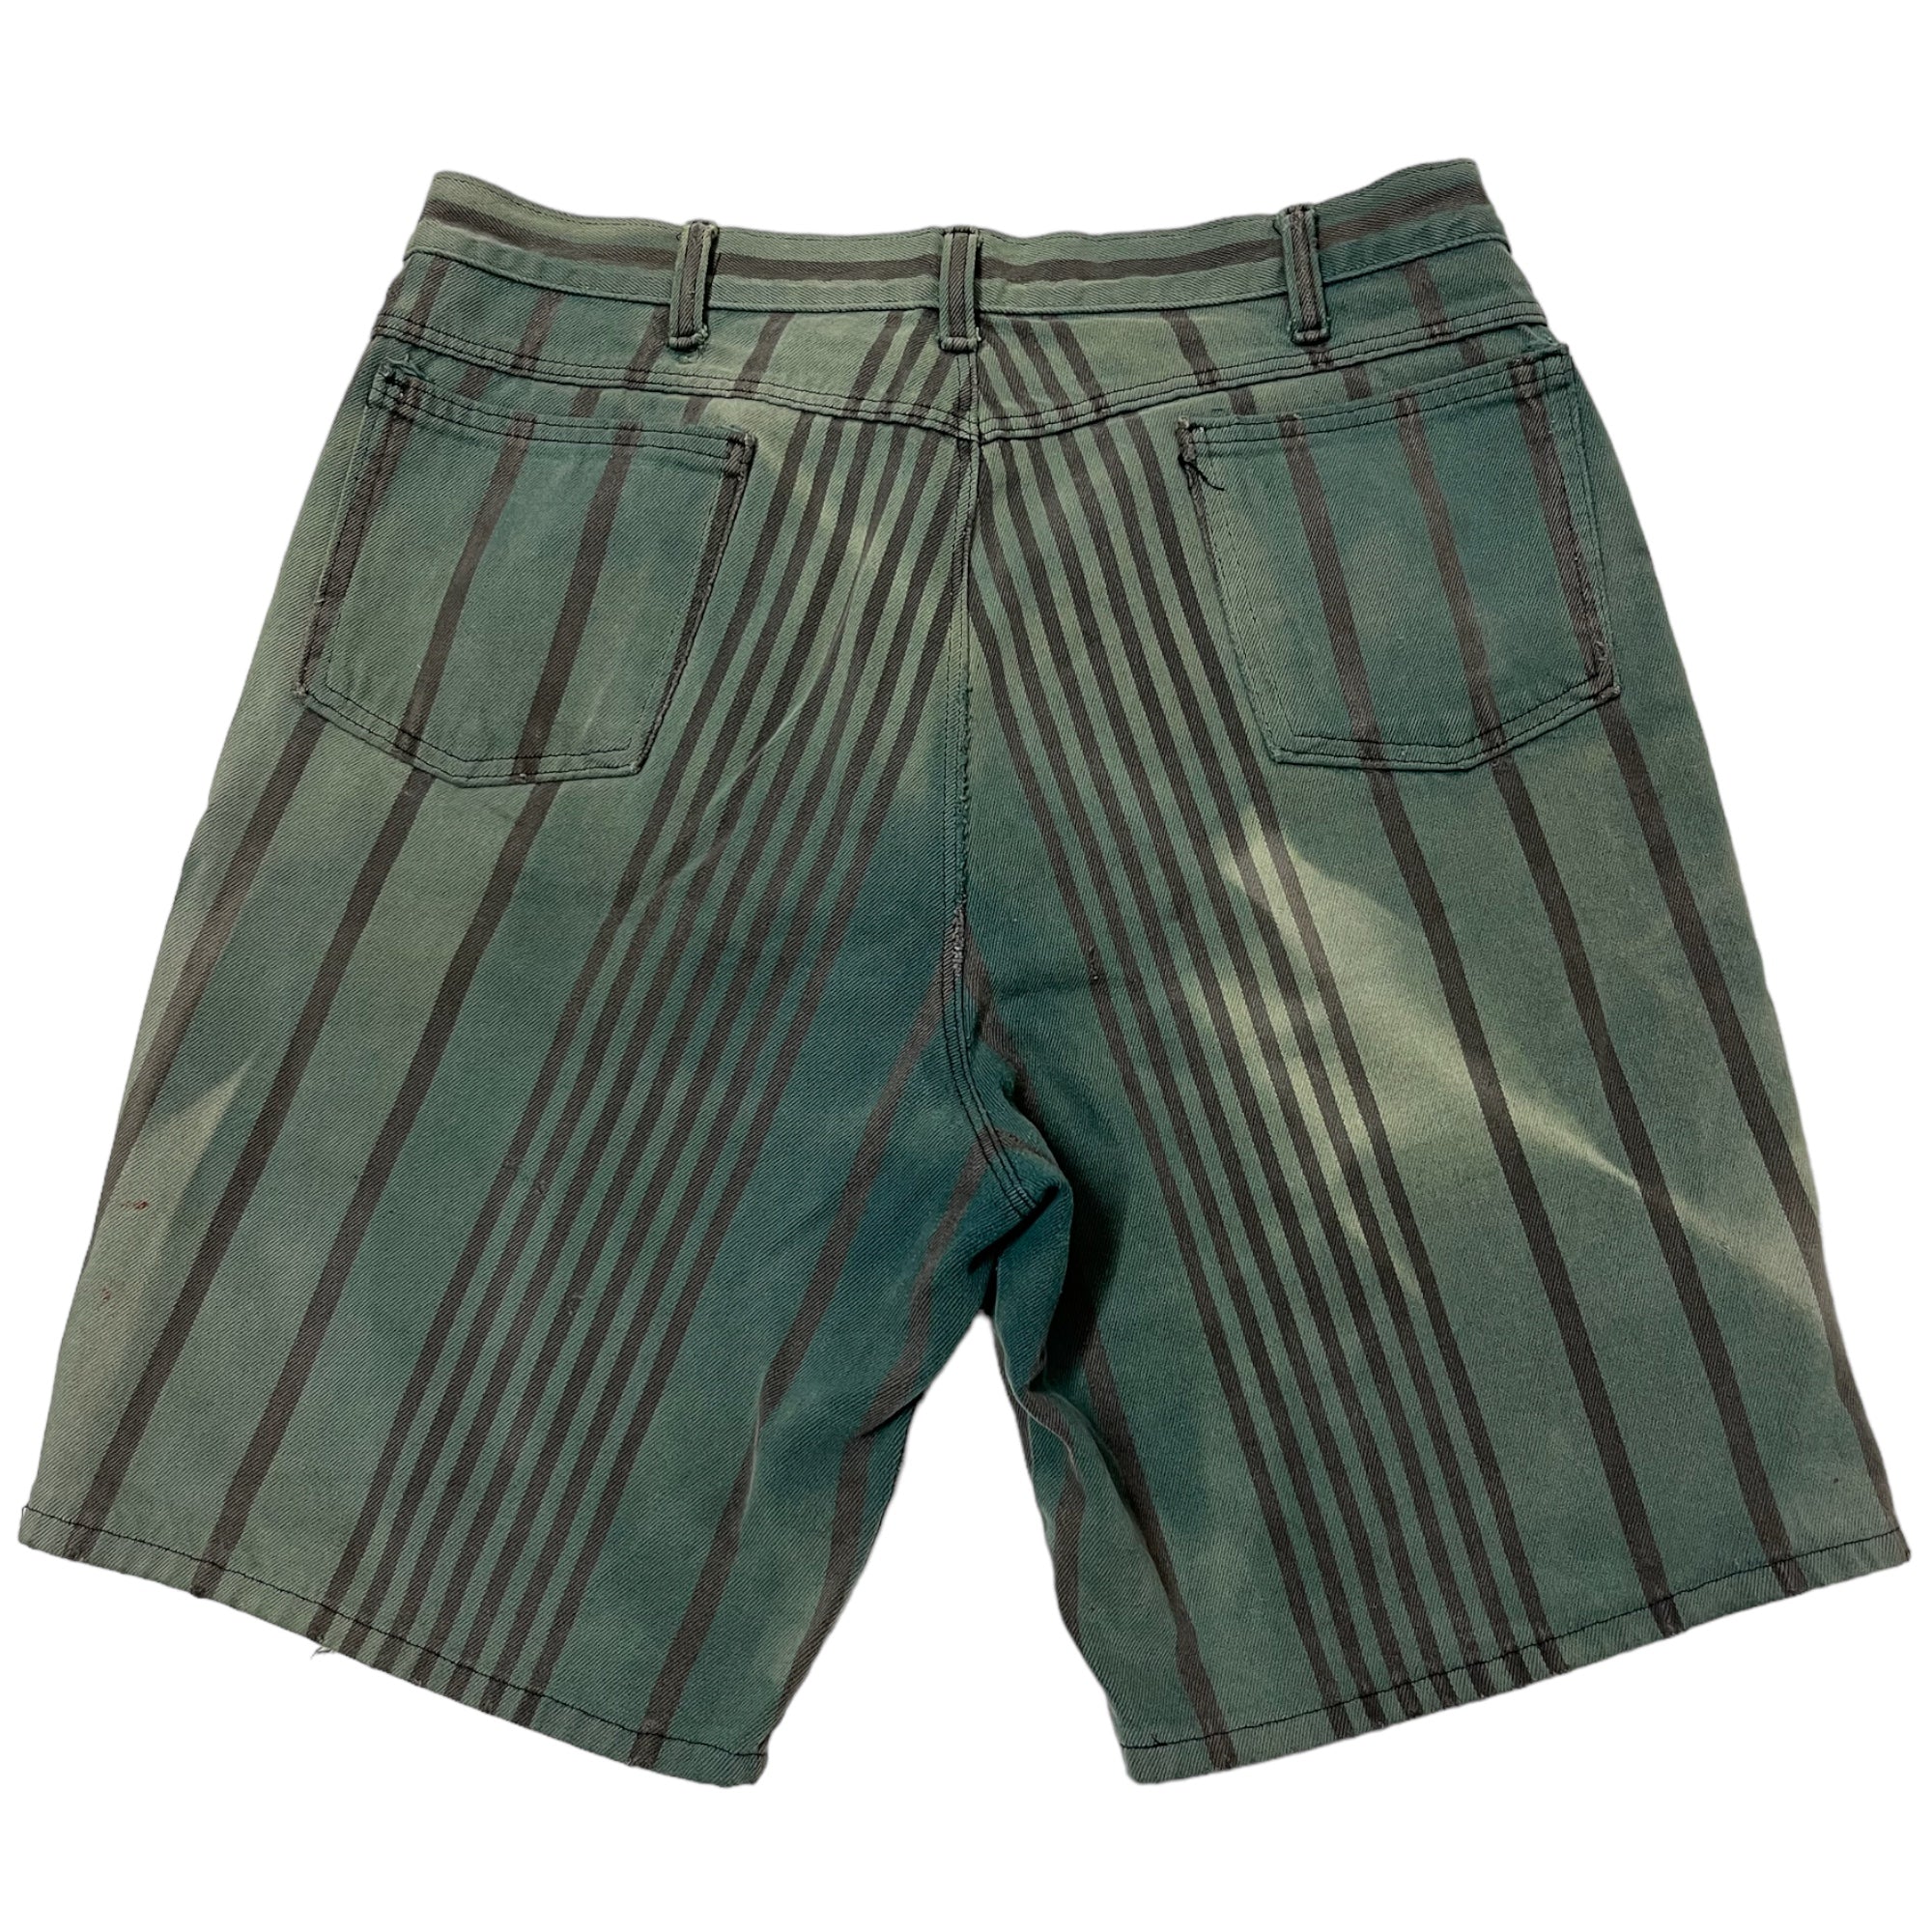 Sun Drenched Striped Distressed Shorts - Green/Drab - 35”